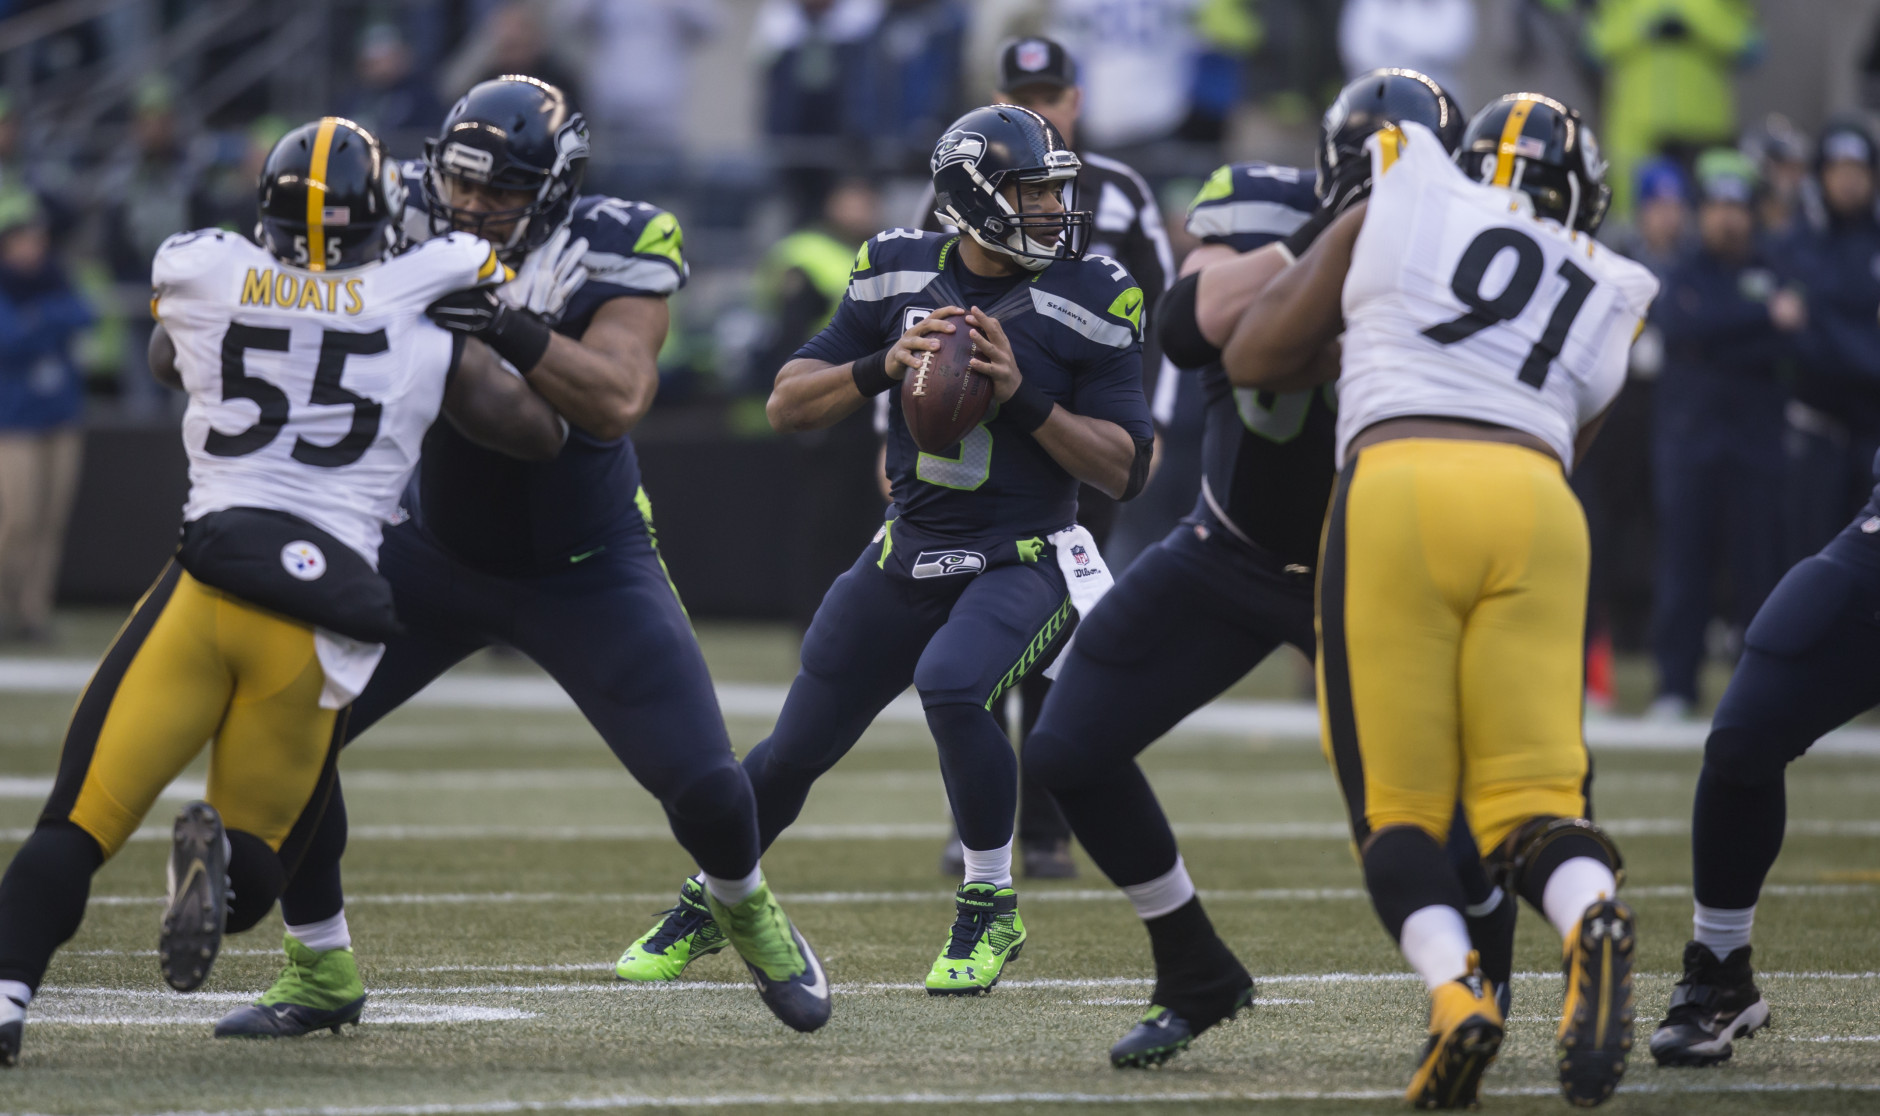 SEATTLE, WA - NOVEMBER 29: Quarterback Russell Wilson #3 of the Seattle Seahawks drops back to pass during the second half of a football game against the Pittsburgh Steelers at CenturyLink Field on November 29, 2015 in Seattle, Washington. The Seahawks won the game 39-30. (Photo by Stephen Brashear/Getty Images)